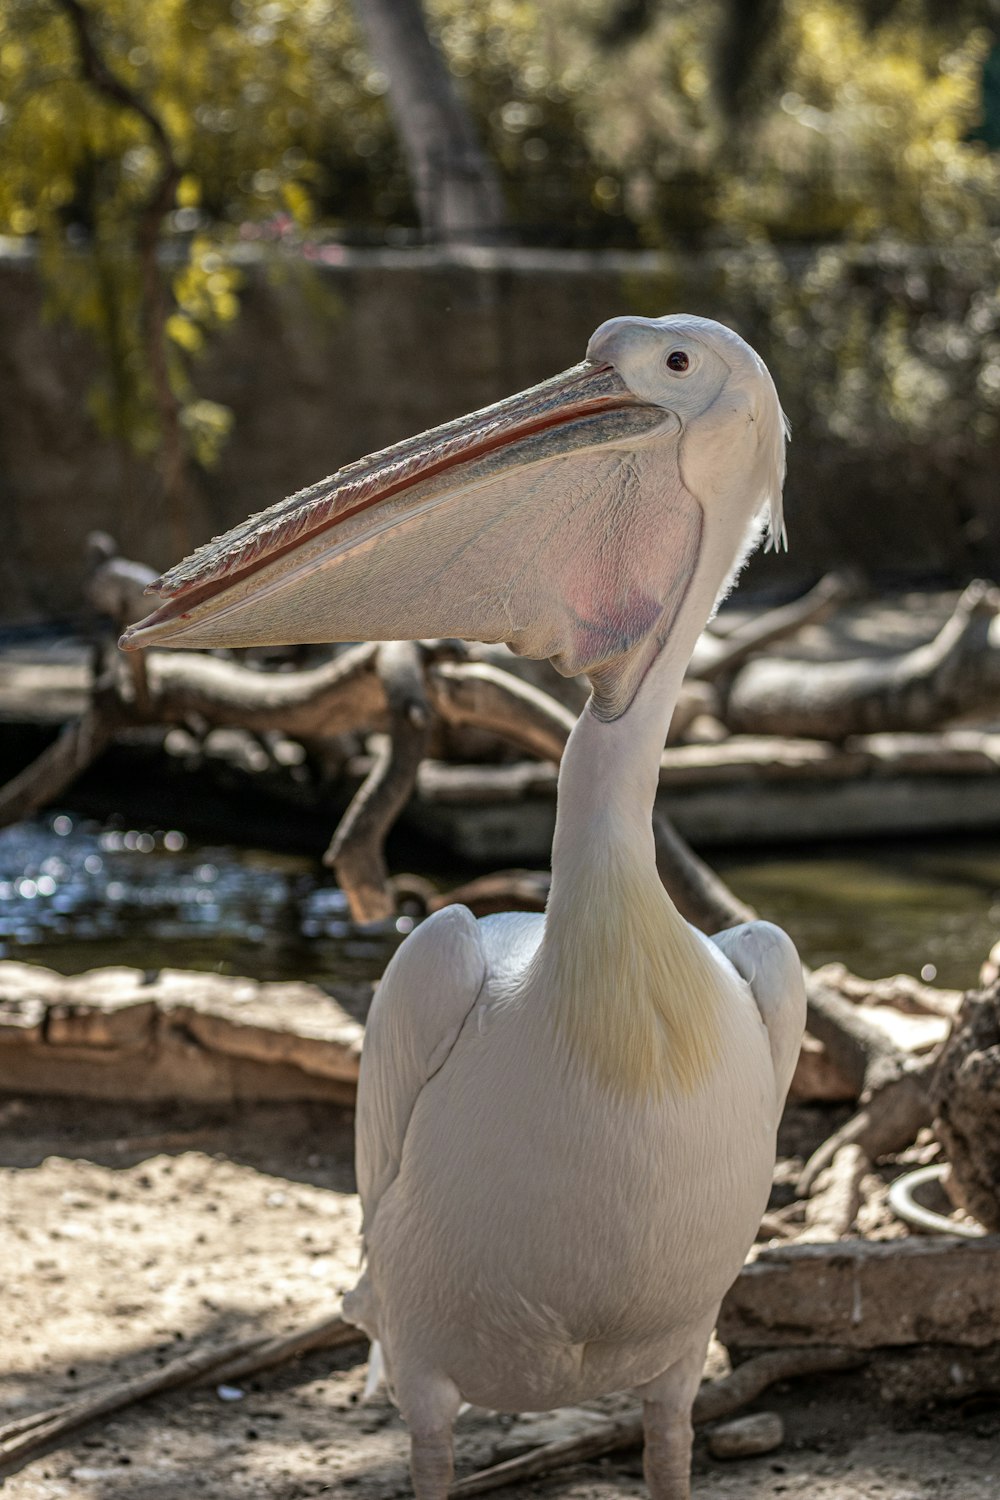 a pelican standing on the ground with its mouth open